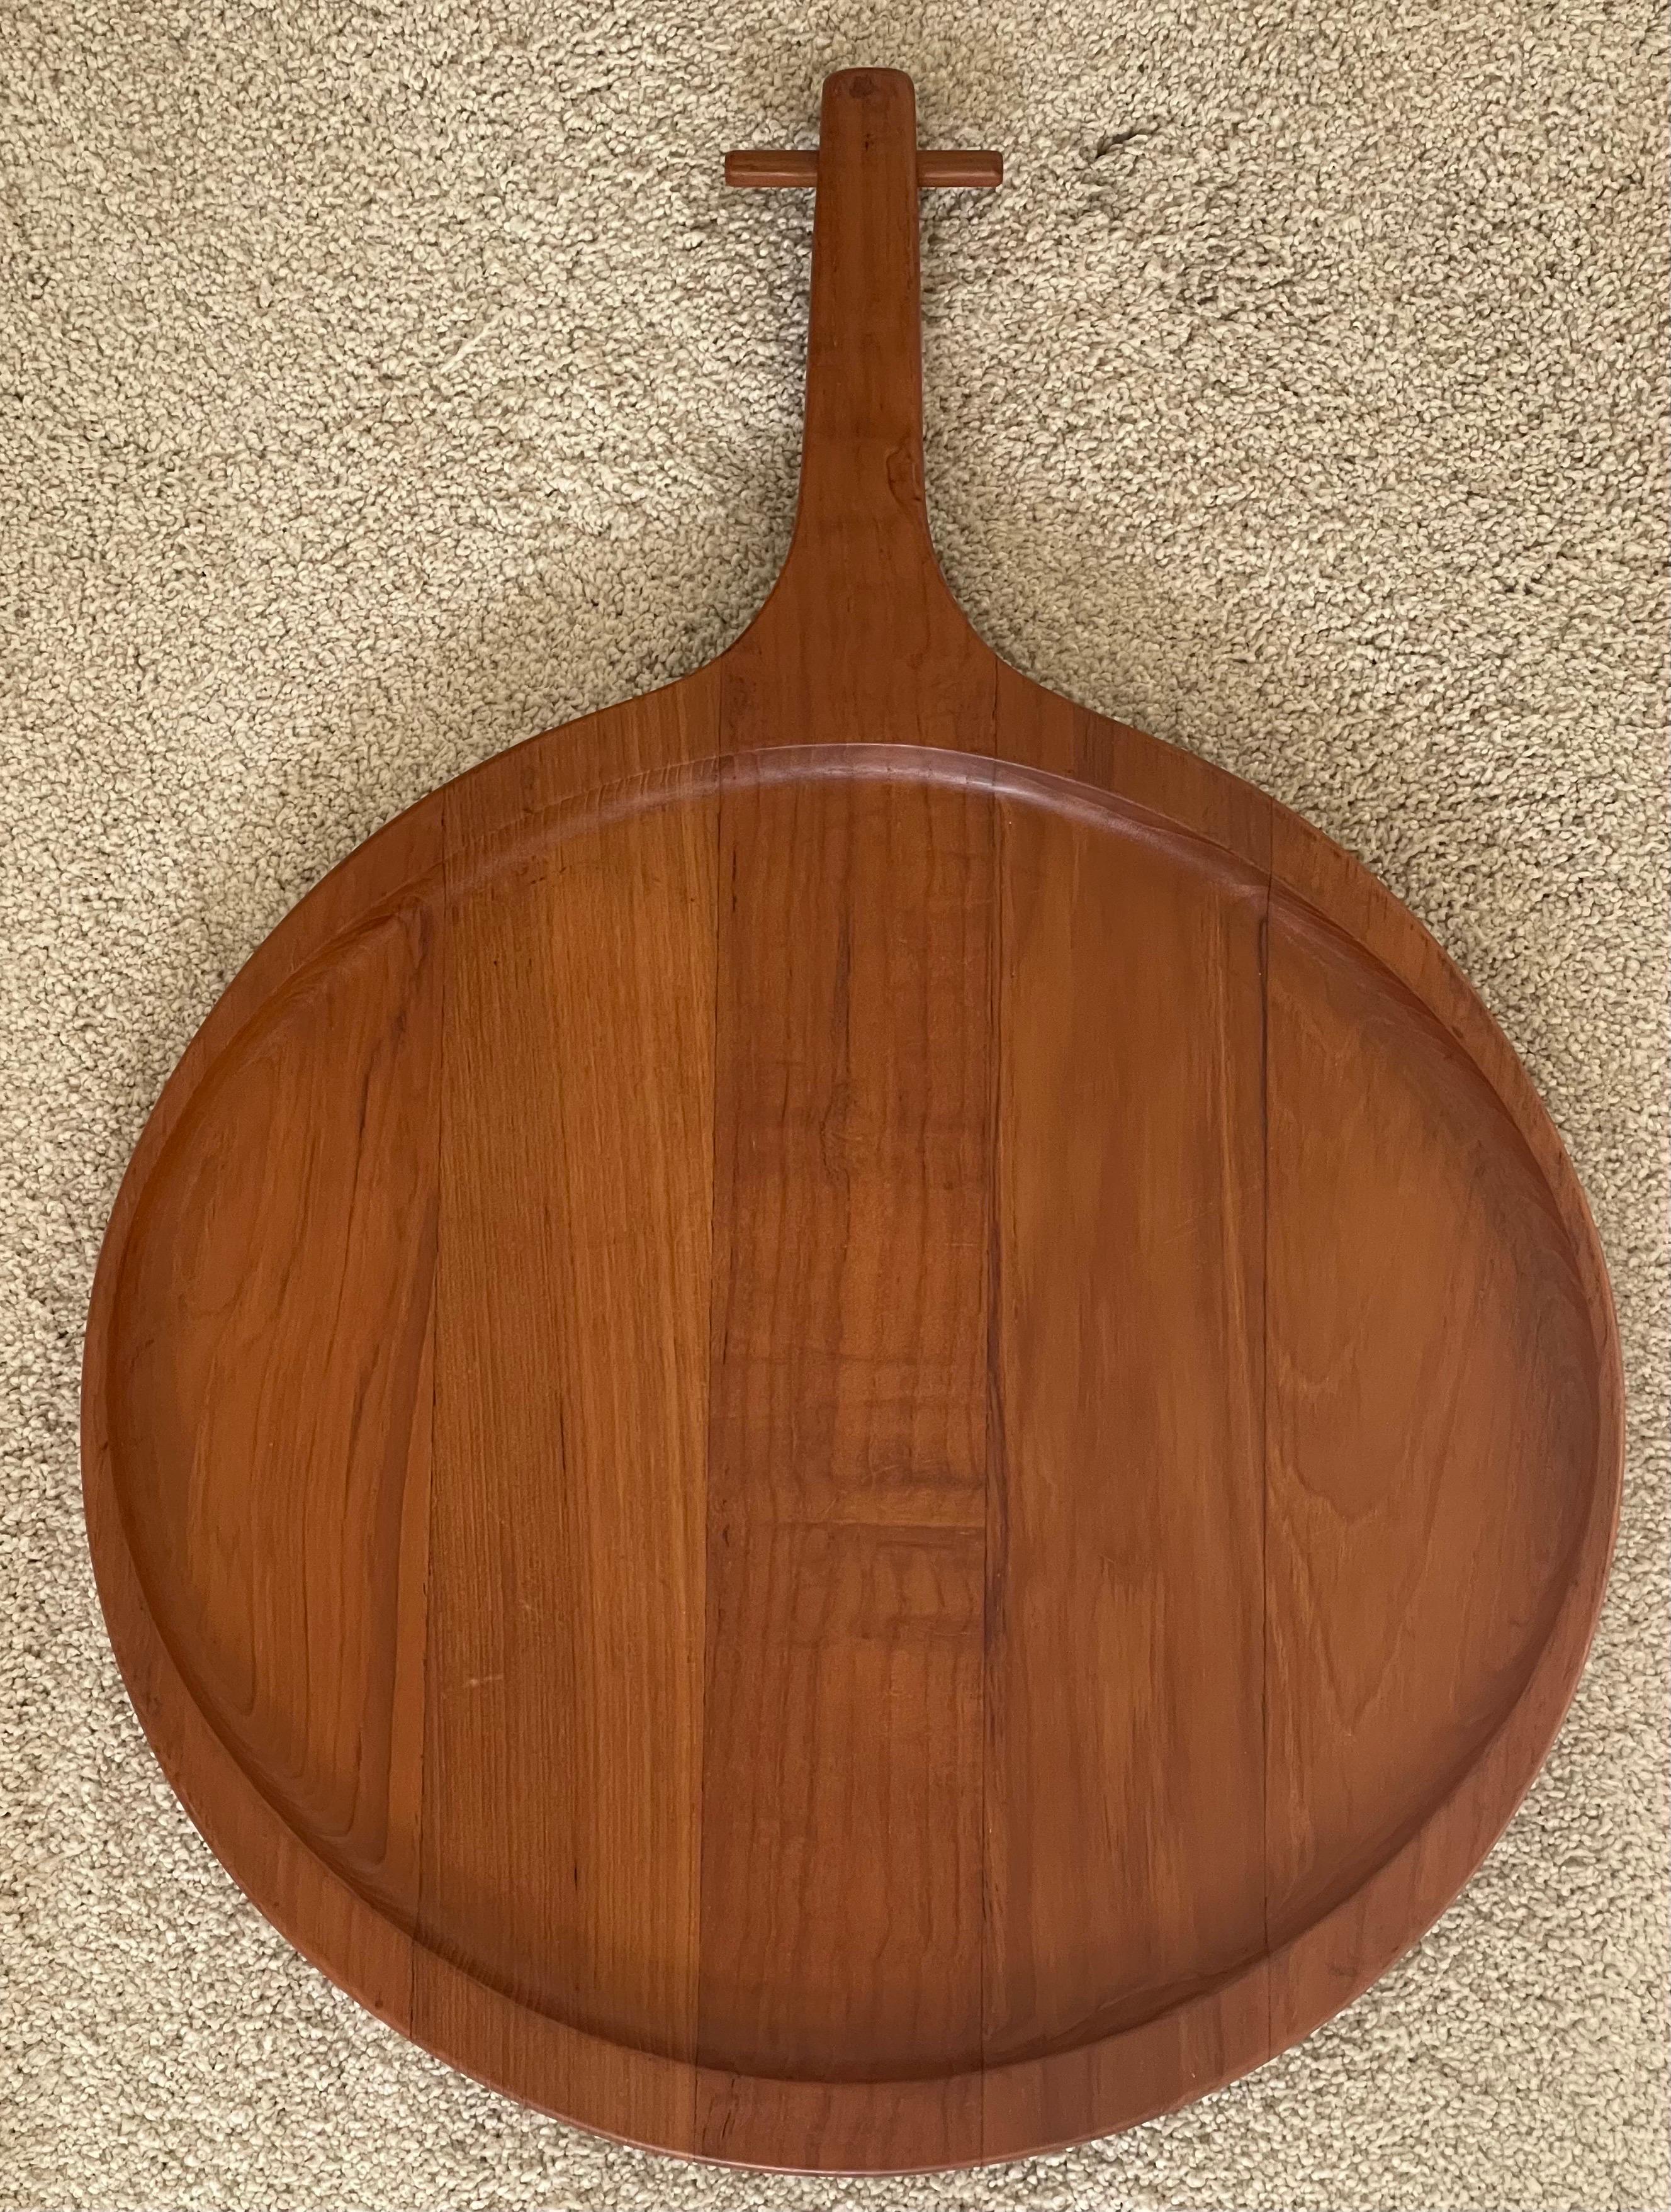 Scandinavian Modern Staved Teak Tray or Cutting Board by Sigvard Nilsson for a.B. Sowe Konst For Sale